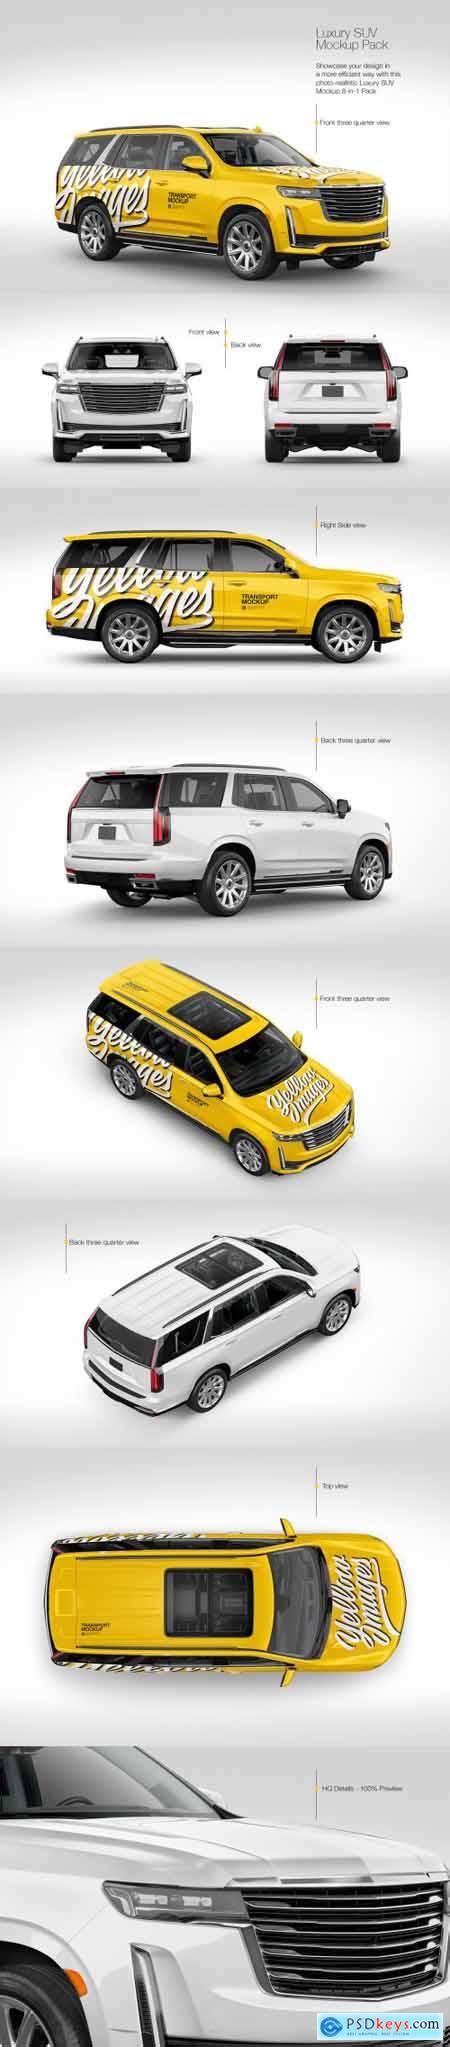 Luxury Suv Mockup Pack 66056 Free Download Photoshop Vector Stock